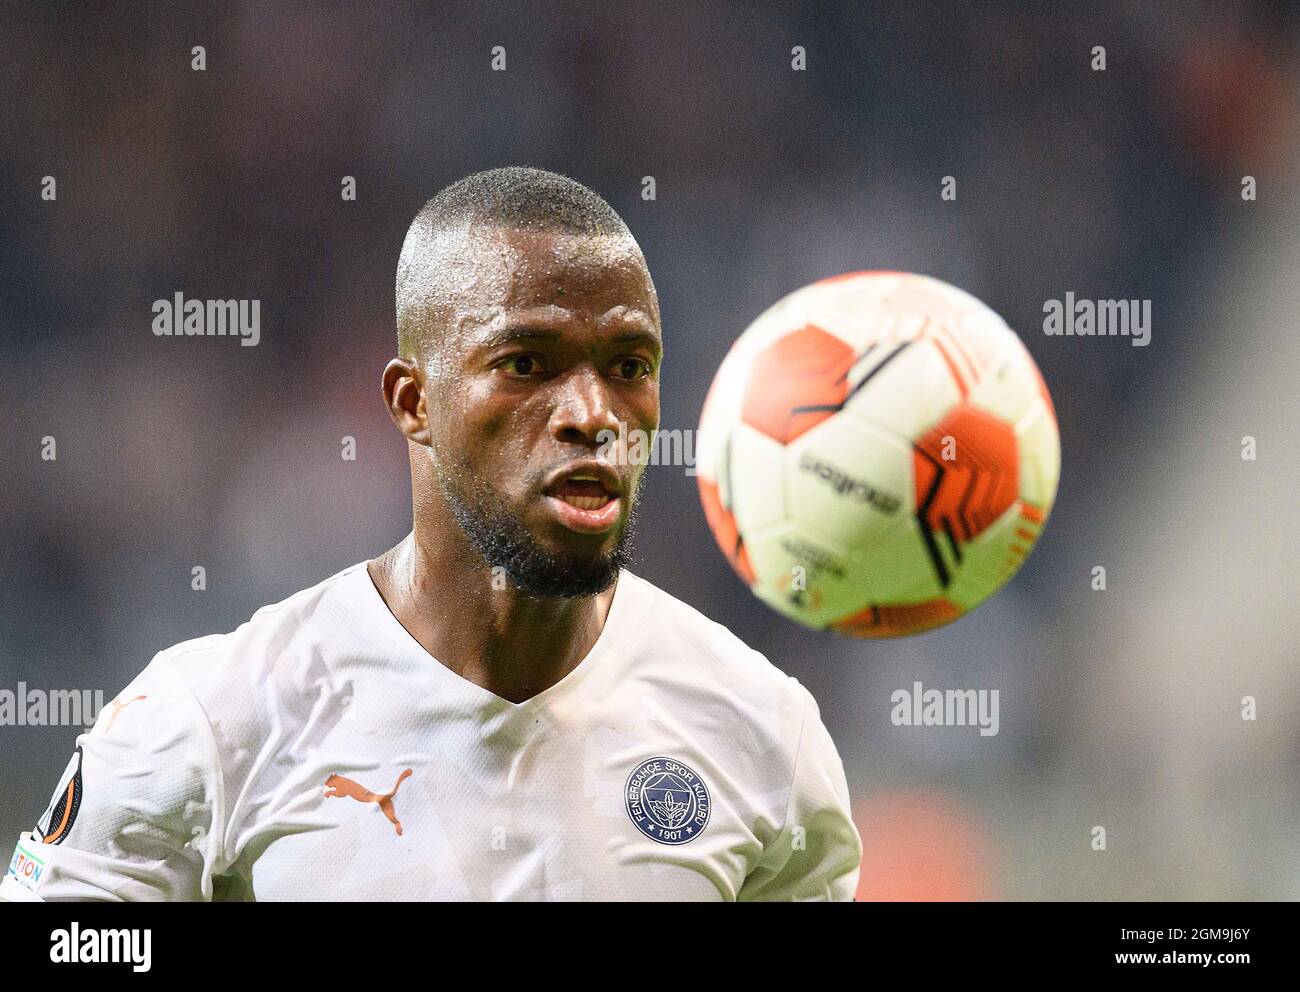 Enner VALENCIA (FSK)) Action, Soccer Europa League, group stage, matchday 1, Eintracht Frankfurt (F) - Fenerbahce SK Istanbul (FSK) 1: 1, on September 16, 2021 in Frankfurt / Germany. Â Stock Photo